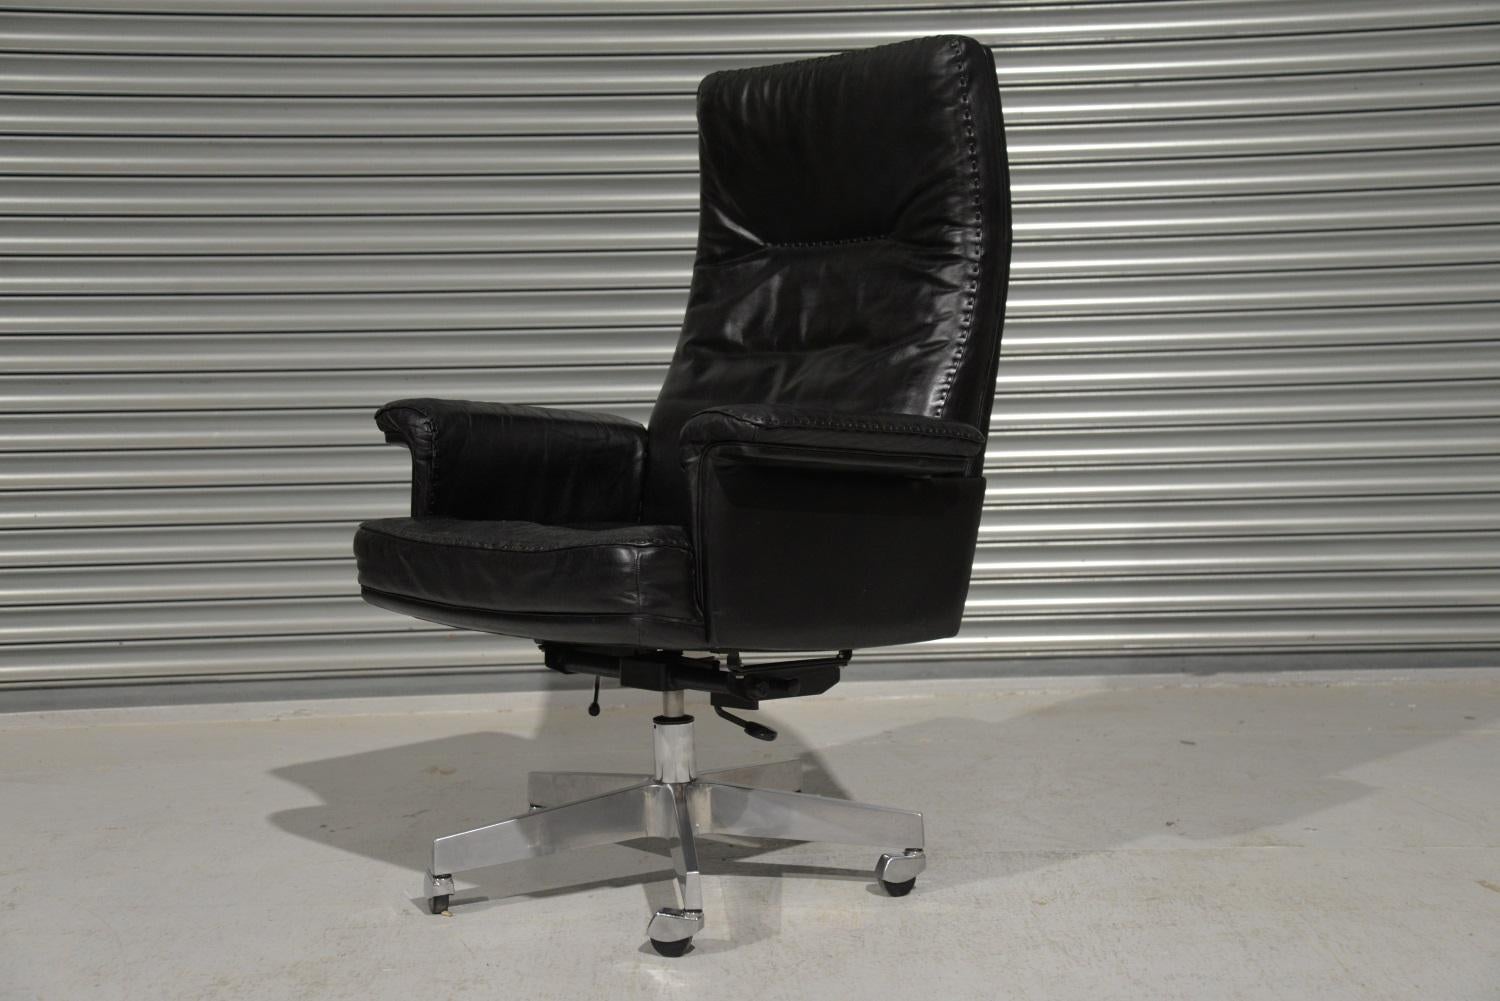 Discounted airfreight for our US and International customers (from 2 weeks door to door).

We are delighted to bring to you an extremely rare vintage De Sede DS 35 Executive swivel armchair on casters. Built to incredibly high standards by De Sede